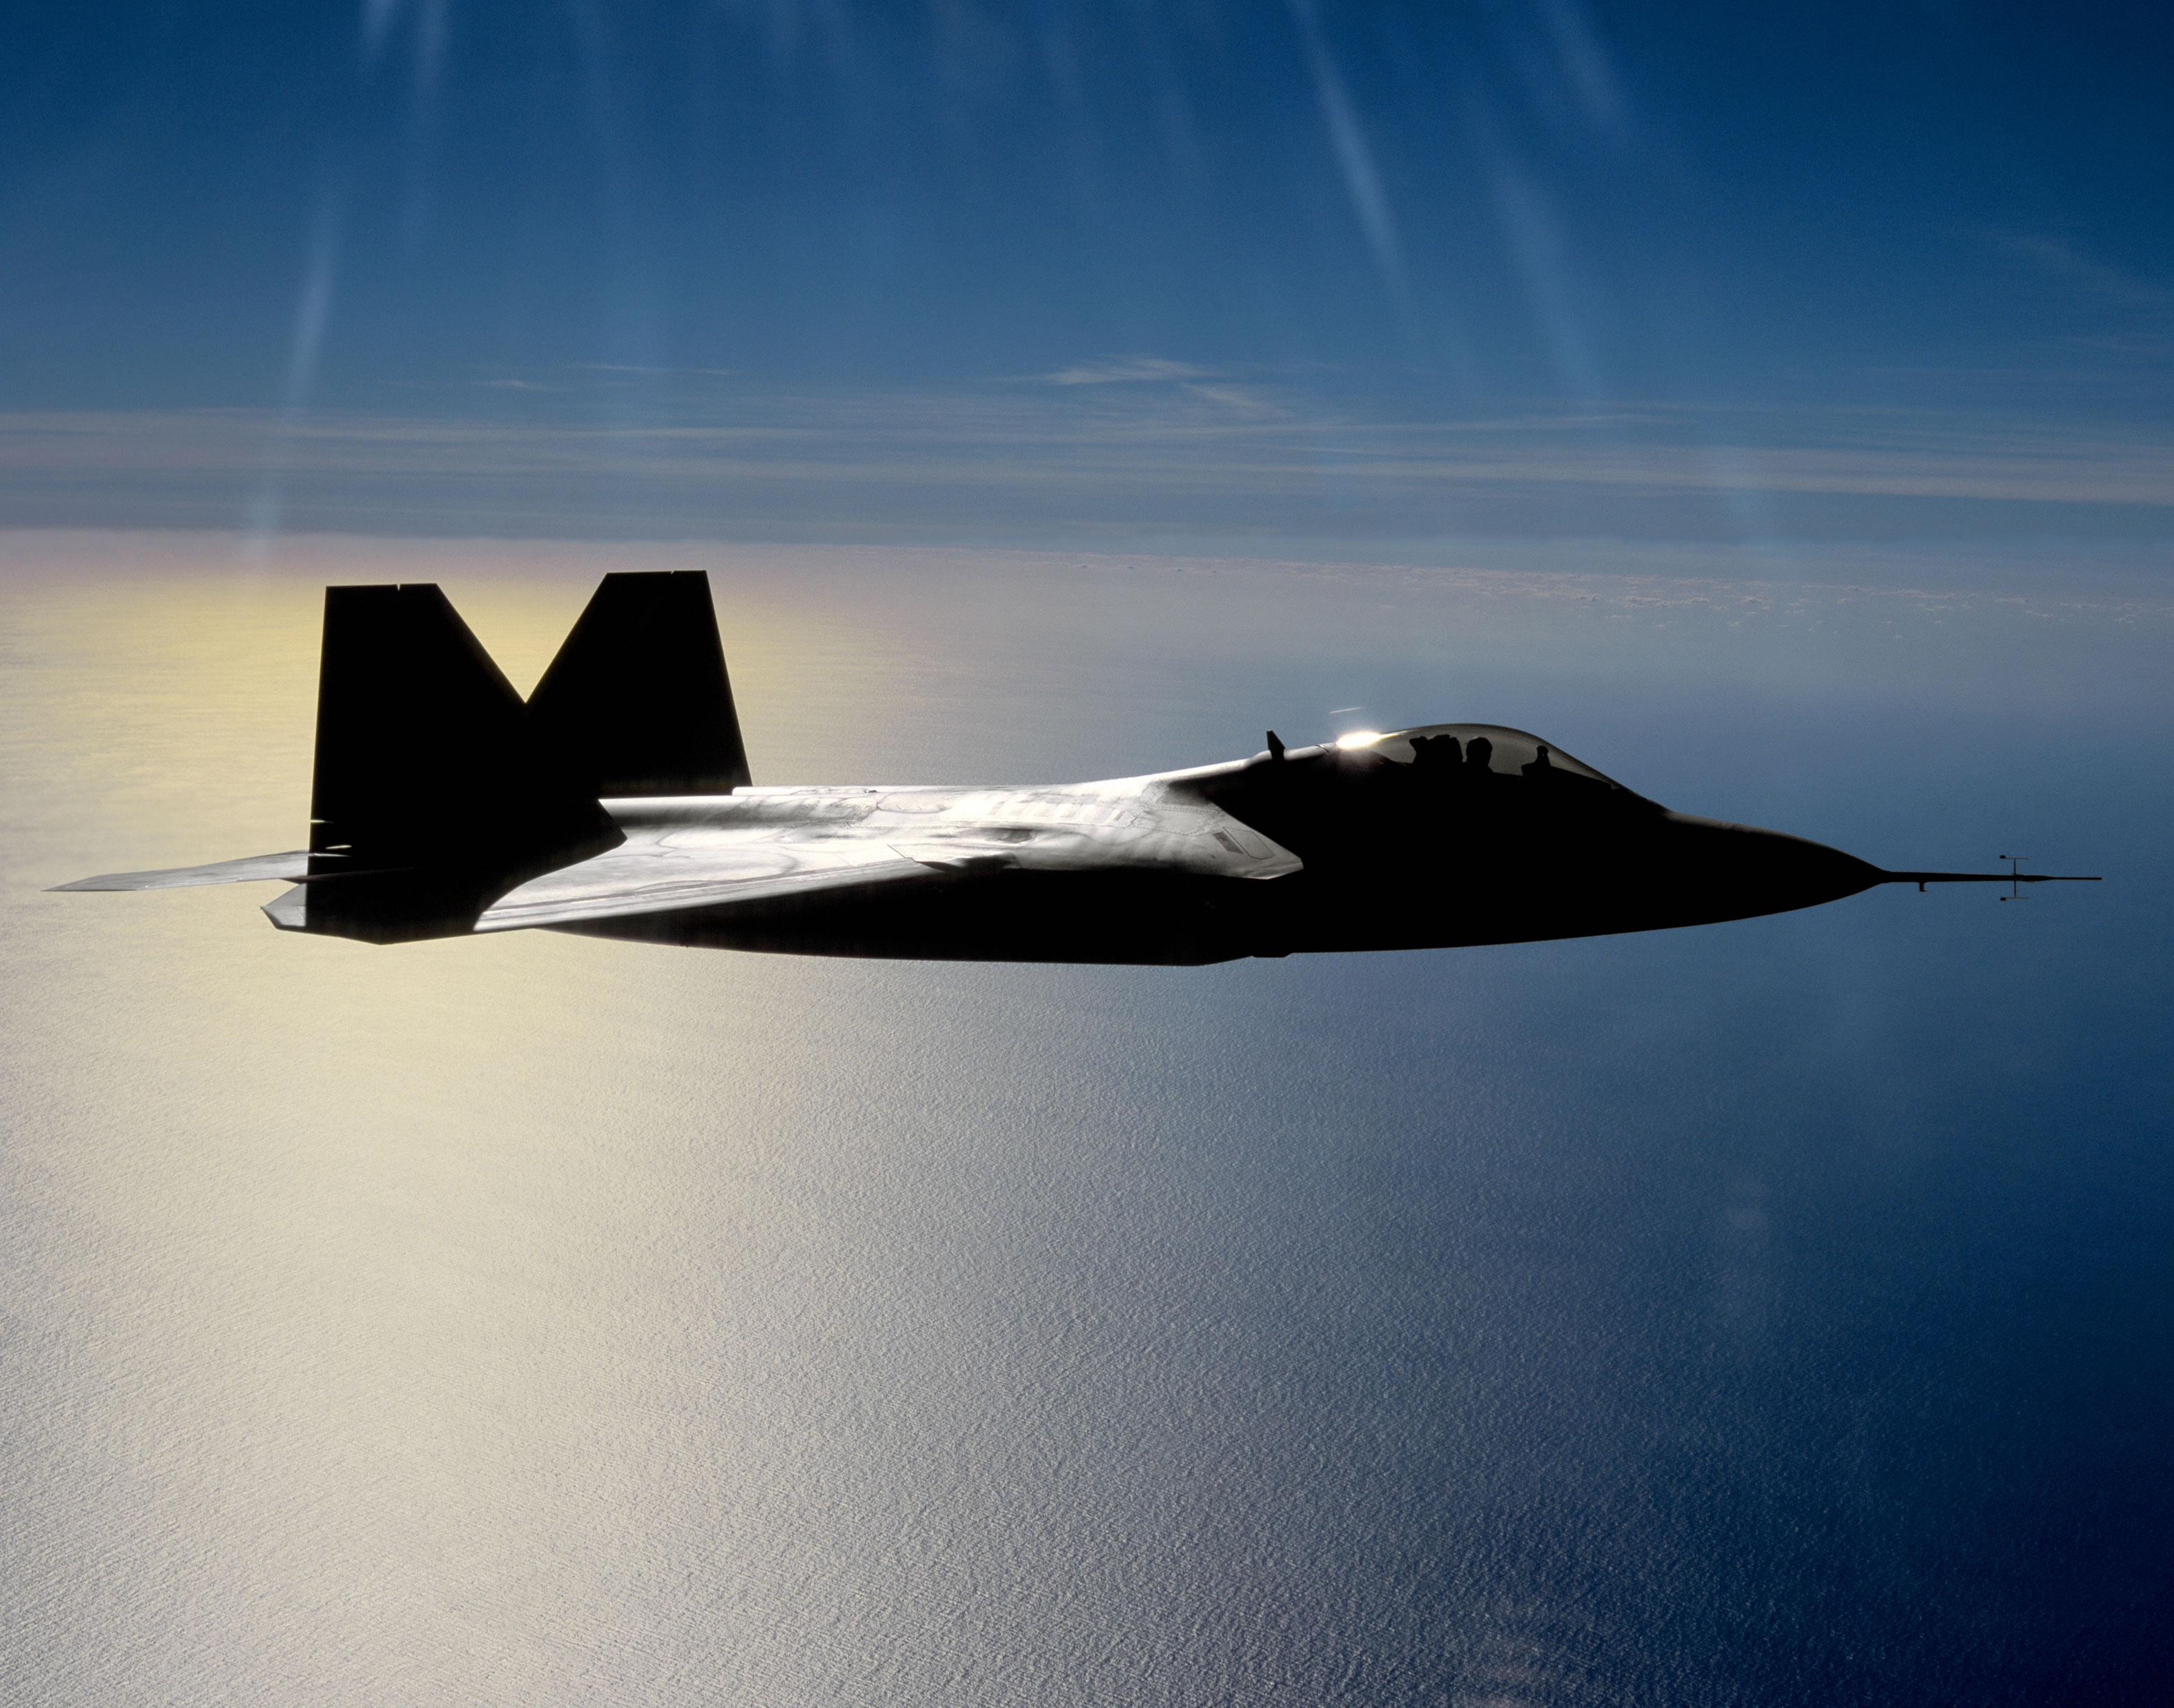 Free Military Desktop Wallpaper, Fighter Jets and more Photo